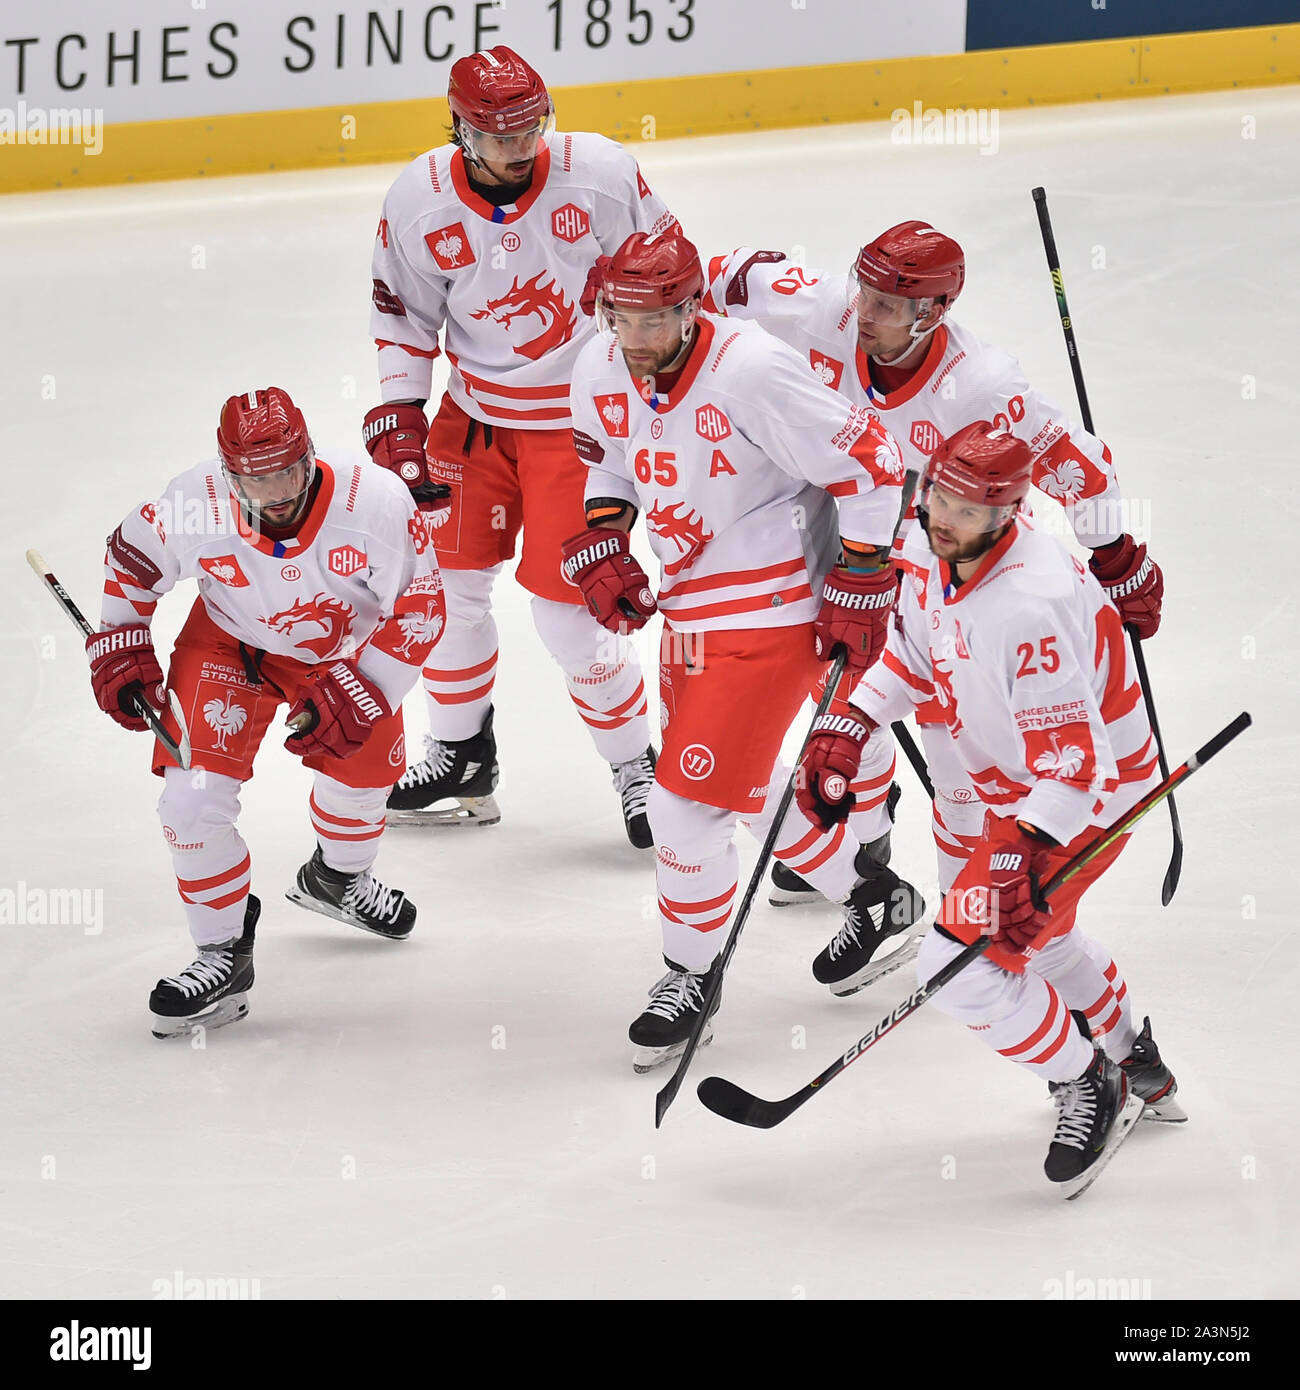 Trinec, Czech Republic. 09th Oct, 2019. Players of Trinec (from left) Erik  Hrna, Matej Stransky, Tomas Marcinko, Petr Vrana and Vladimir Roth  celebrate goal during the Ice Hockey Champions League group D